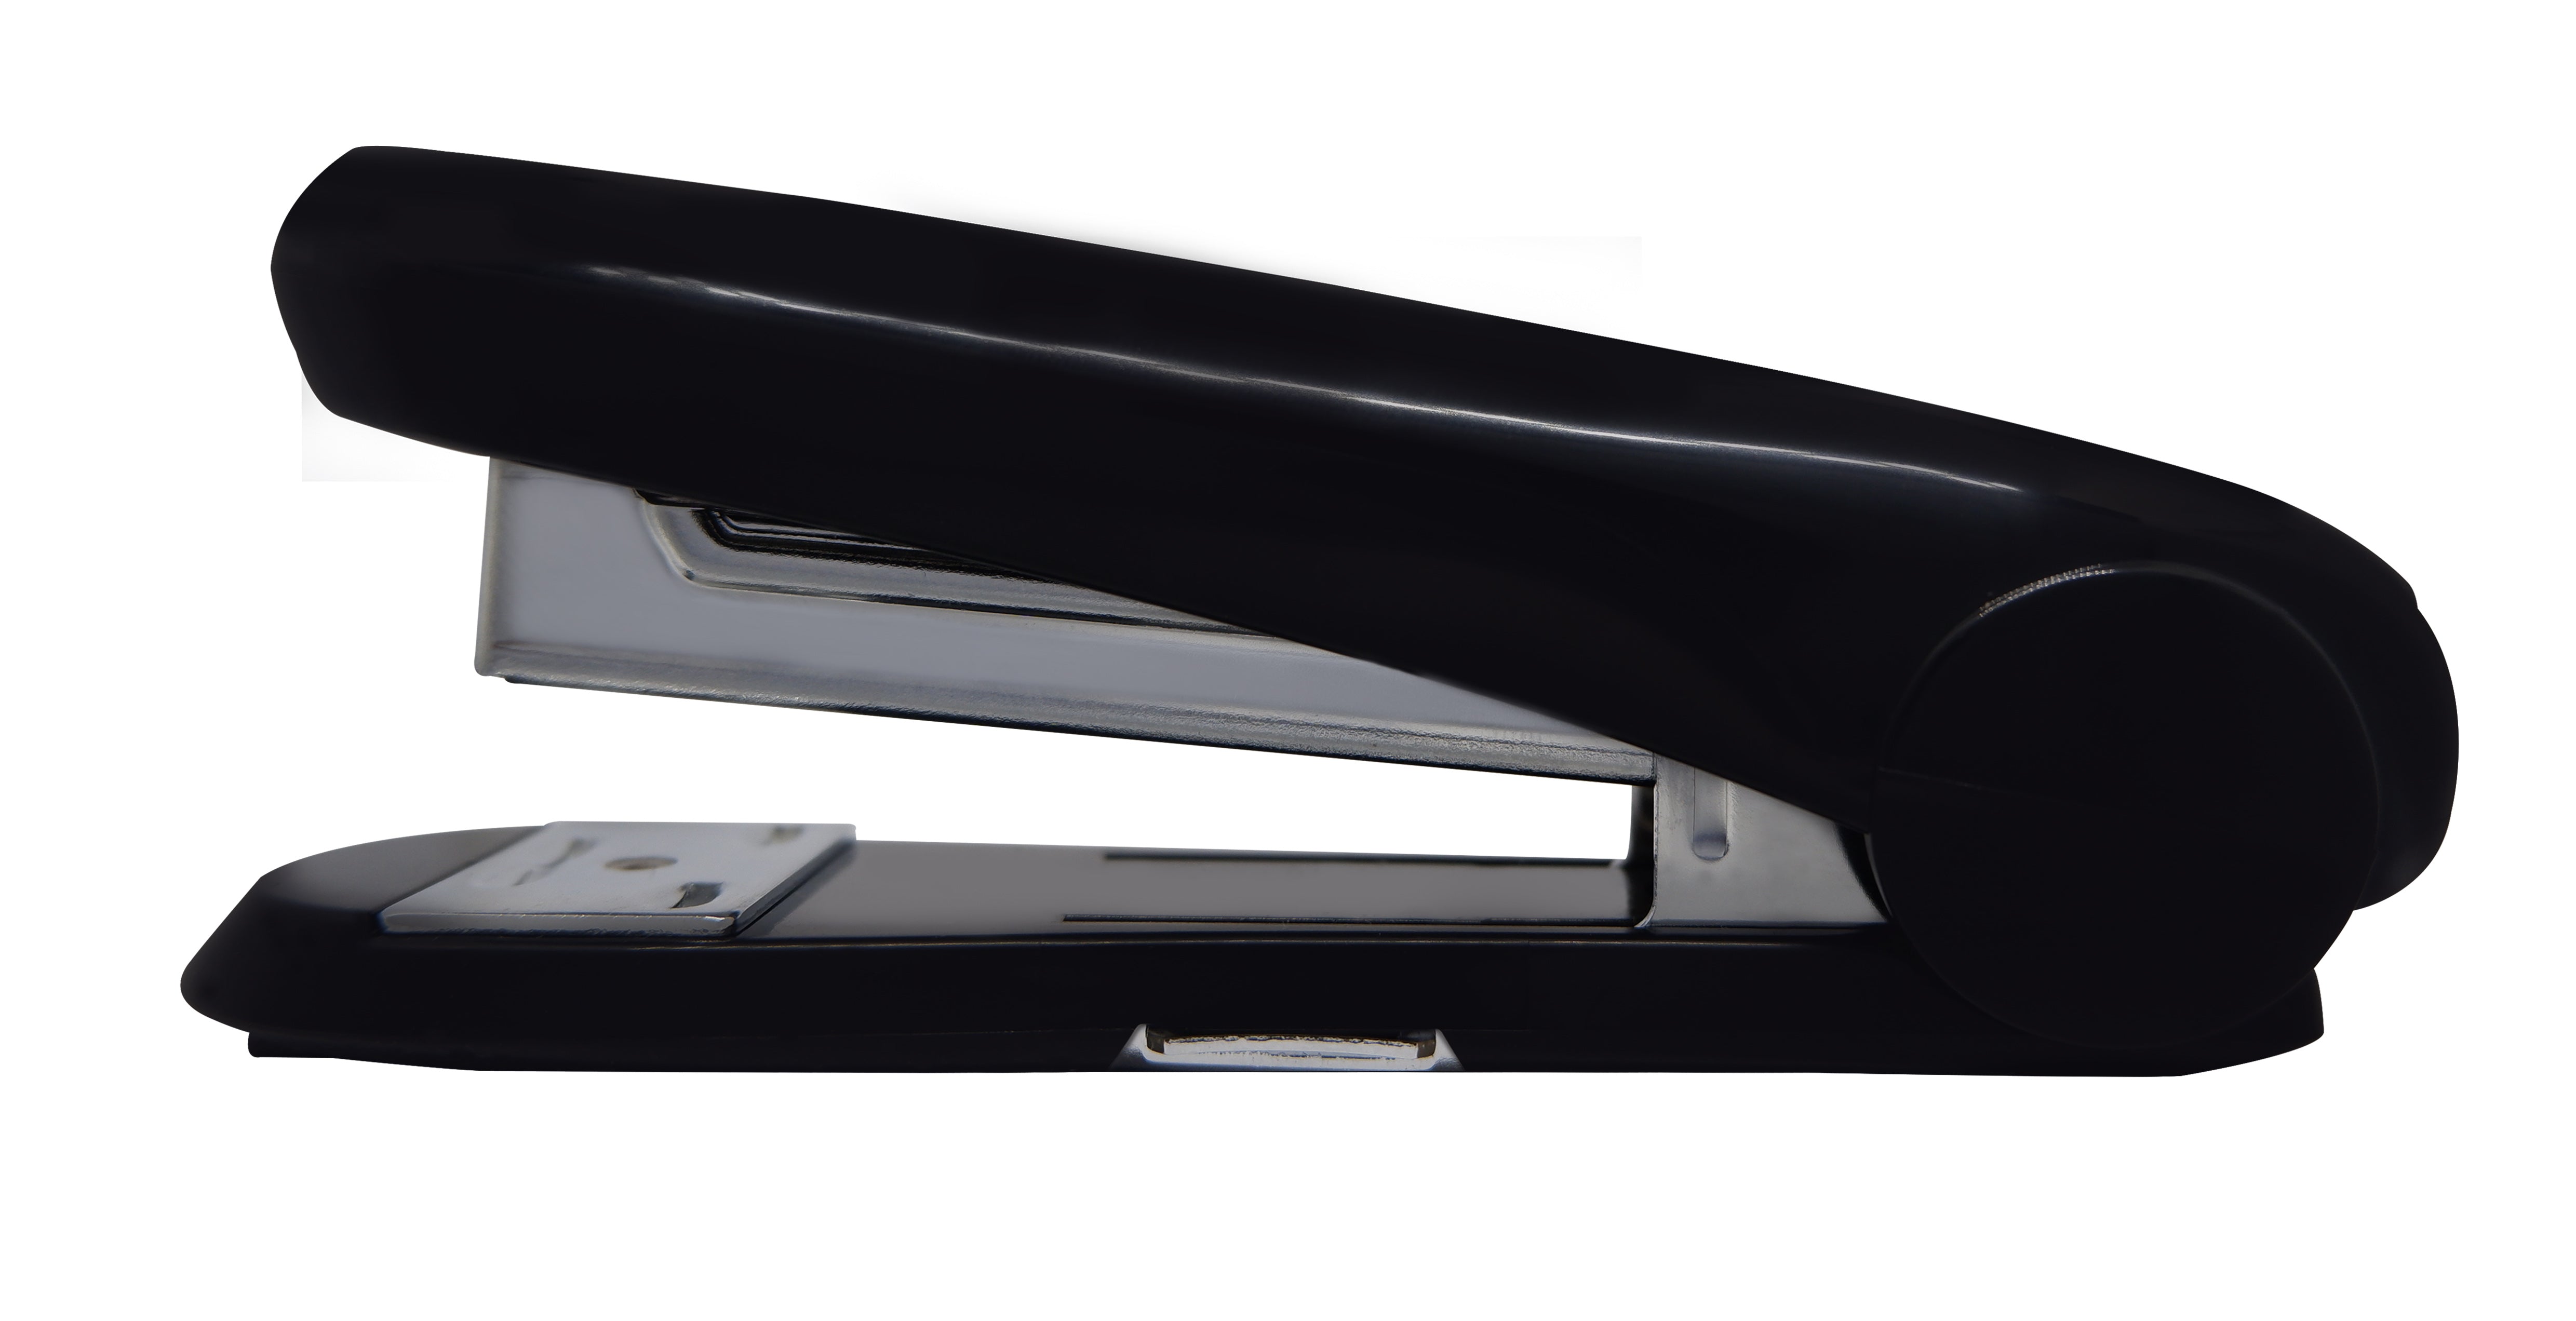 MAX HD-50R Desktop Stapler with Remover